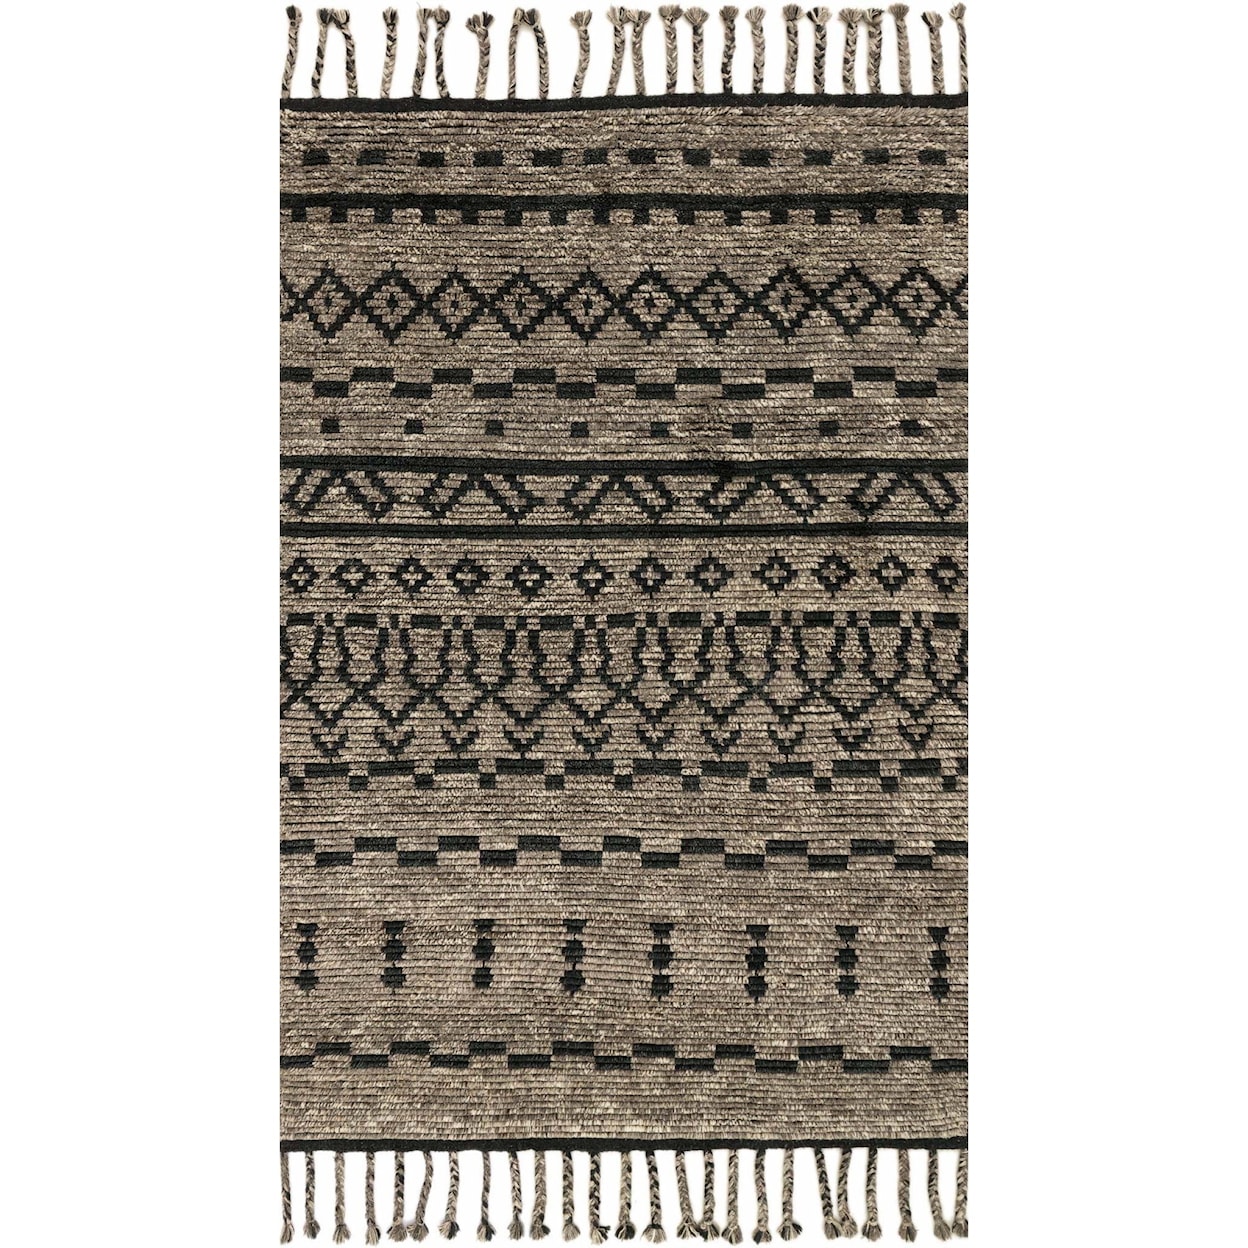 Magnolia Home by Joanna Gaines for Loloi Tulum 8' 6" x 11' 6" Rectangle Rug